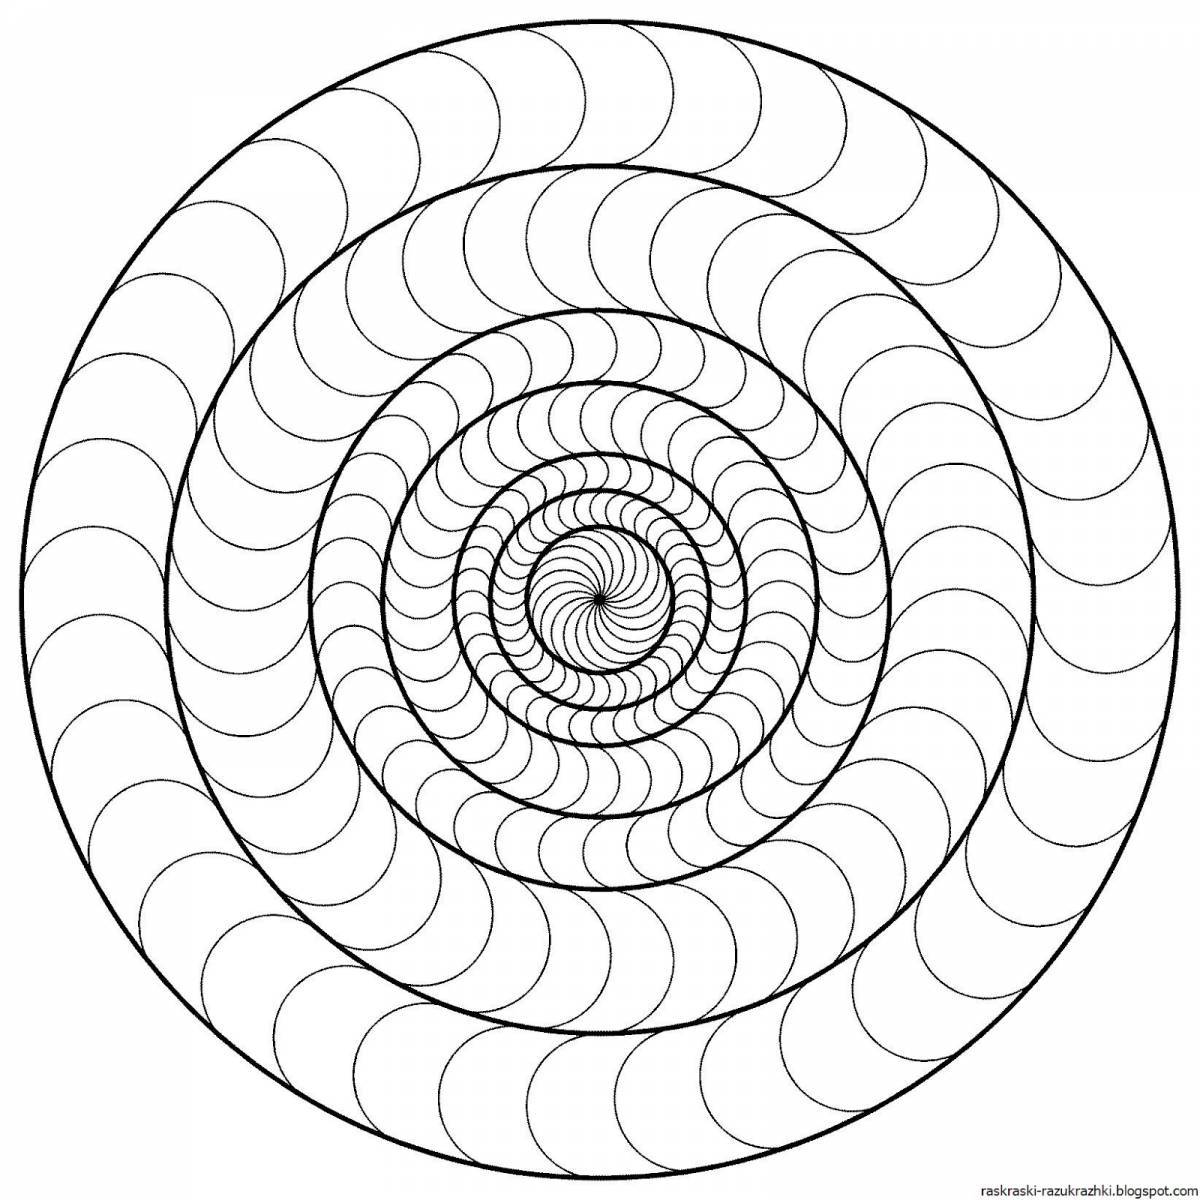 Coloring page serene spiral pattern